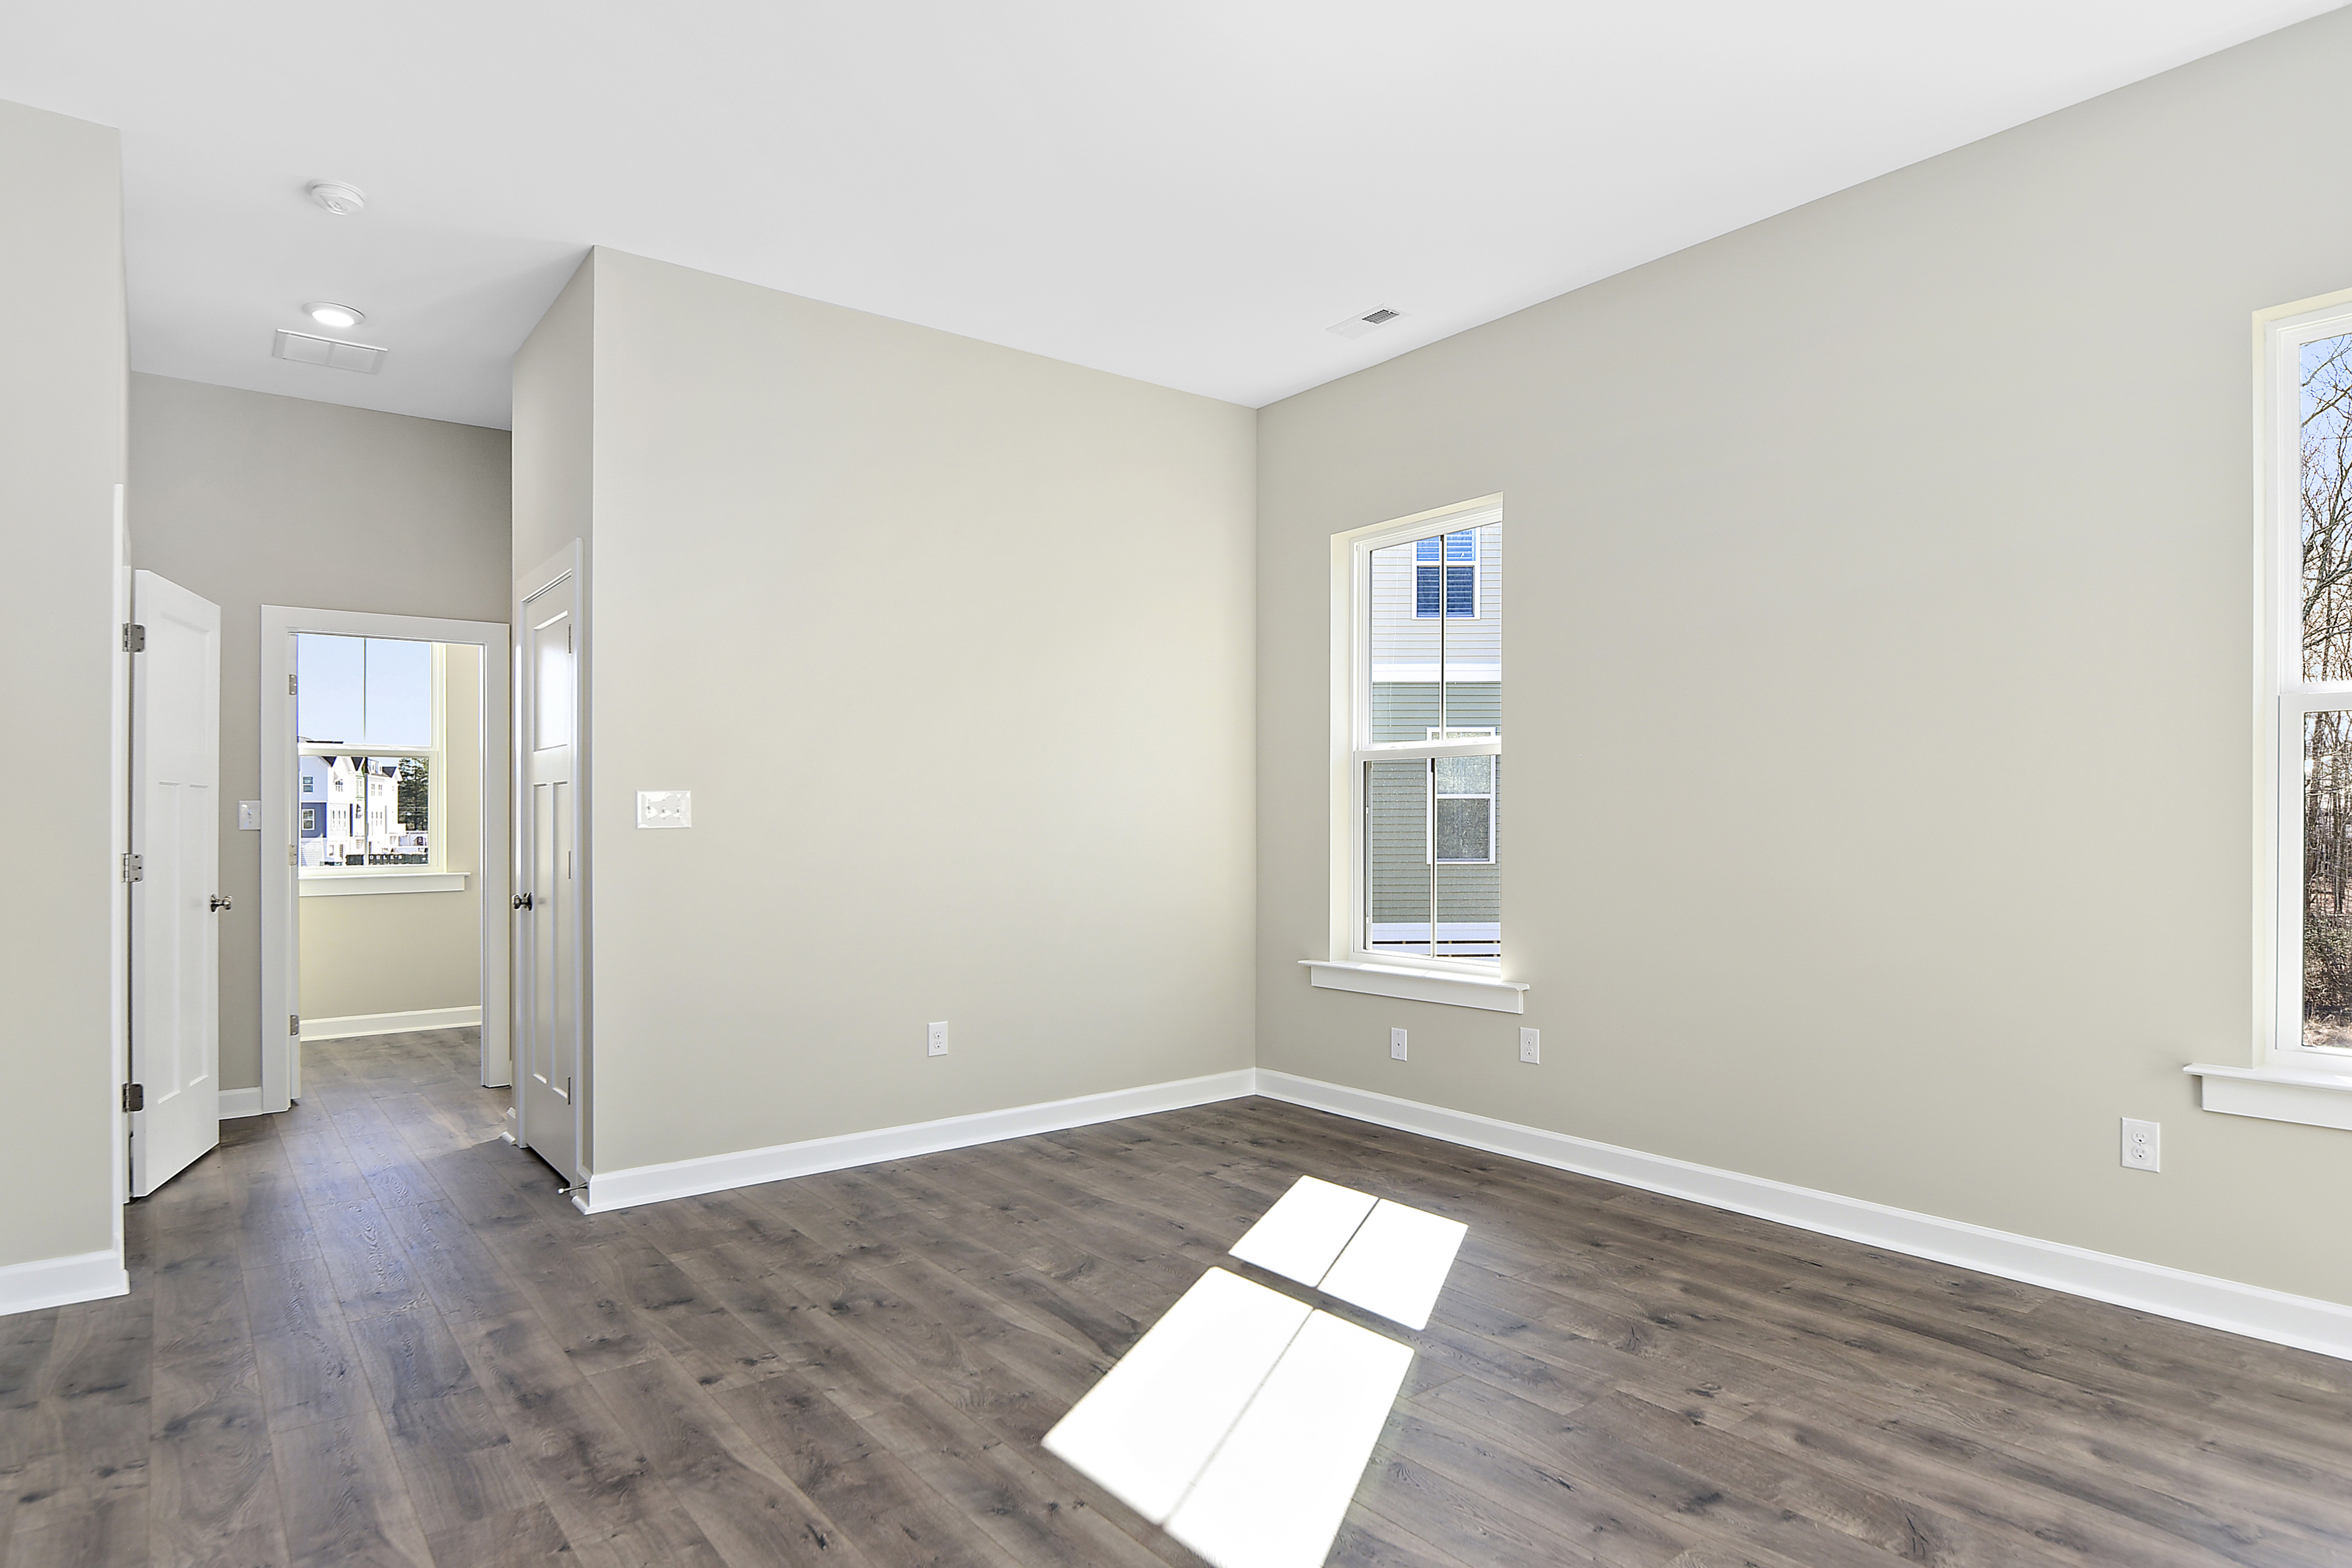 Naturally lit bedroom with beige walls and hardwood flooring in Evergreene Homes new construction home